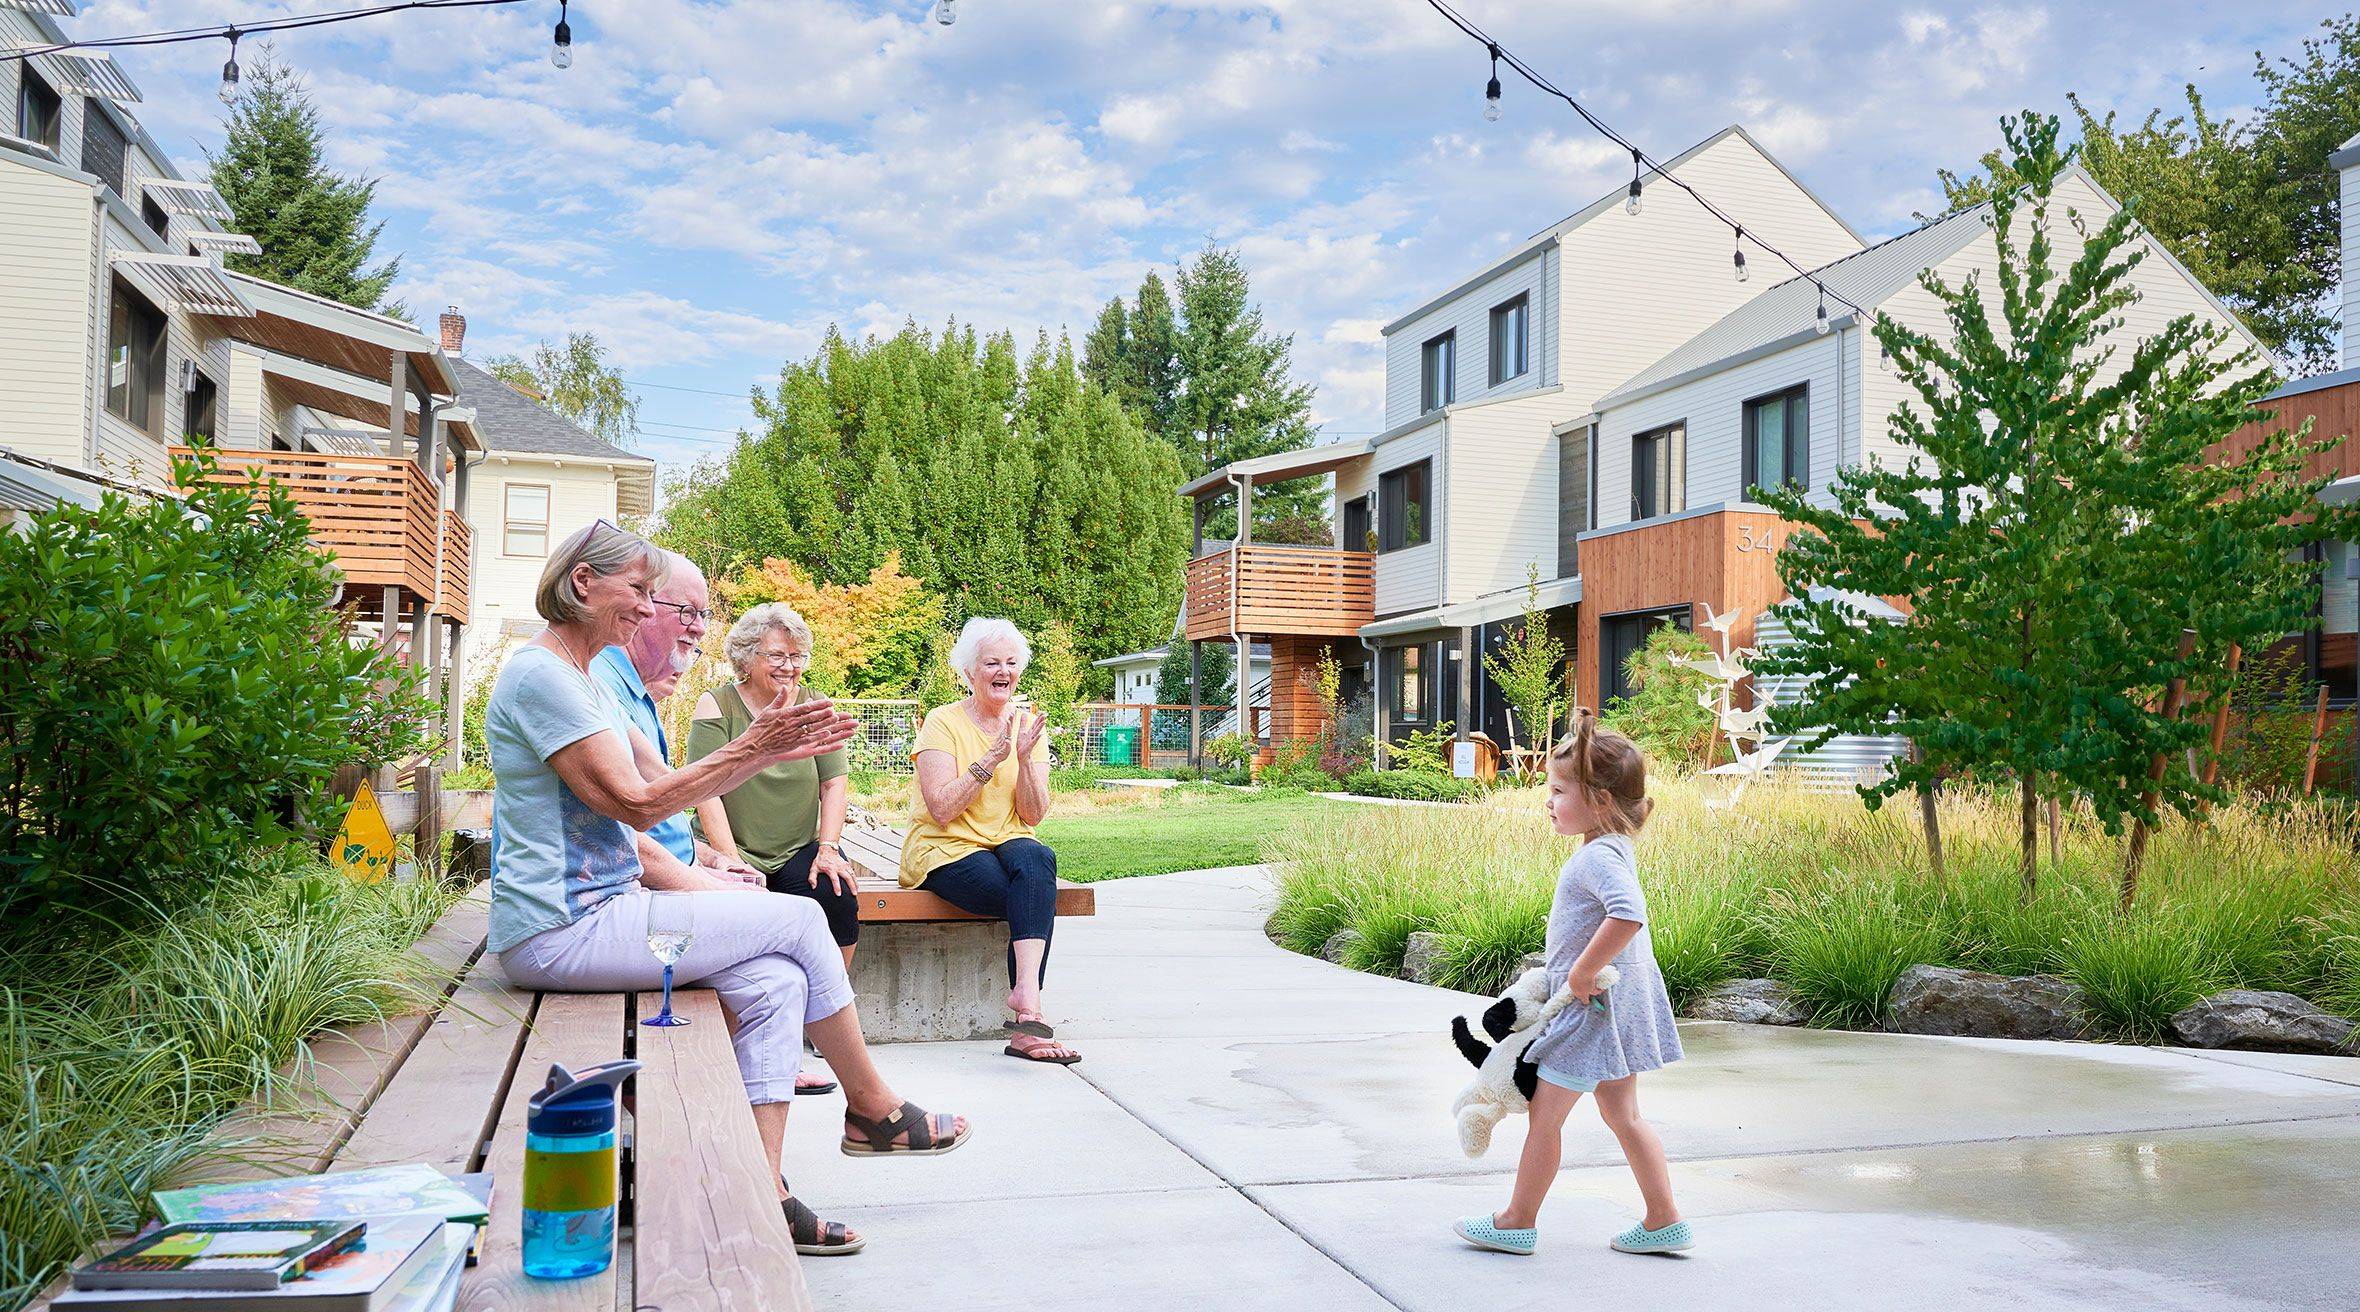 Residents seated on bench and greeting little girl in central courtyard at Tillamook Row in Portland, Oregon.